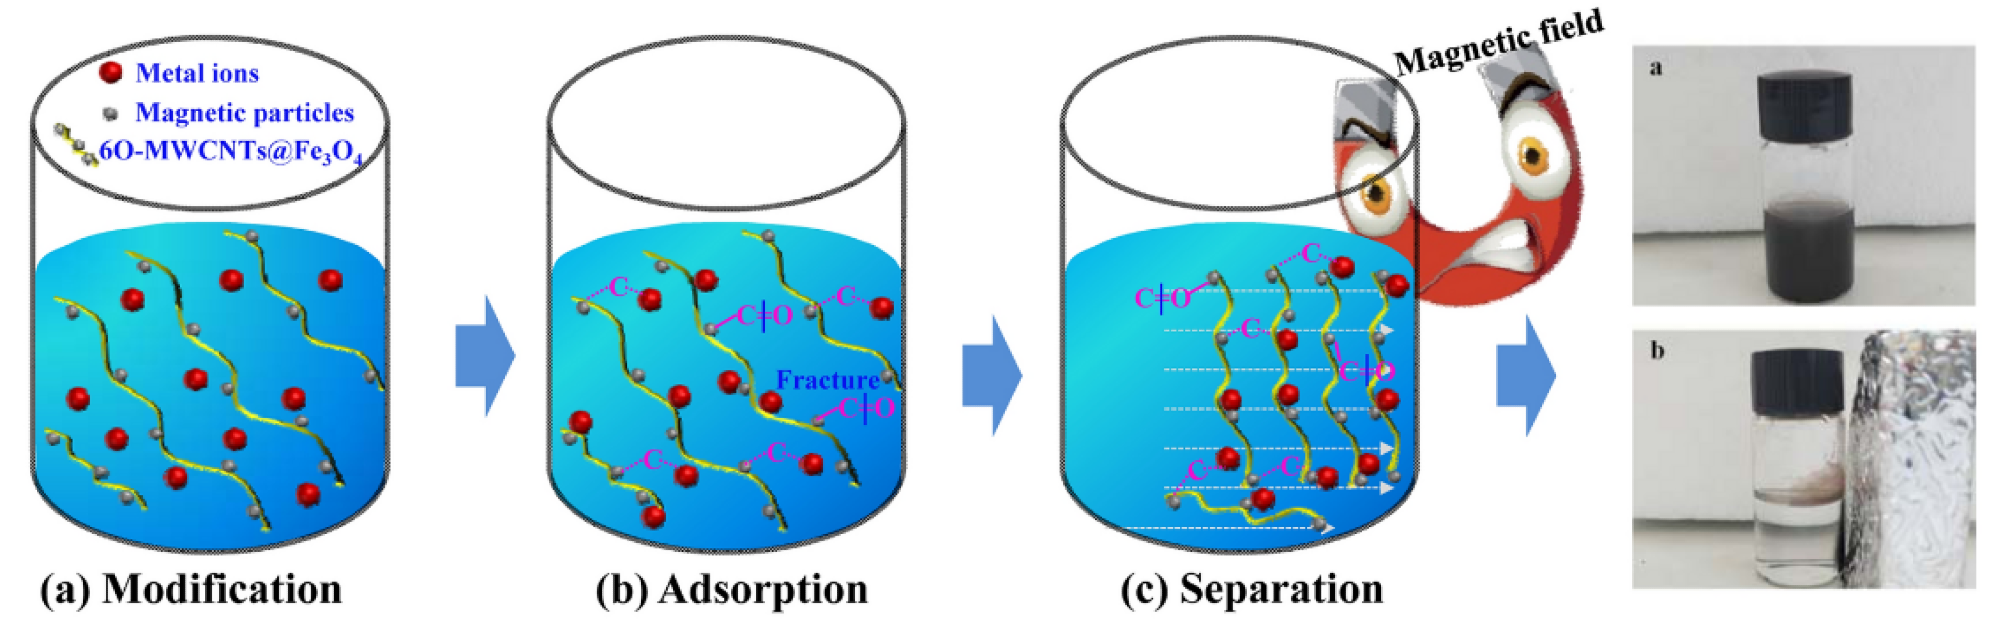 The mechanism of heavy metal ion absorption by 6O-MWCNTs@Fe3O4 in wastewater [91].